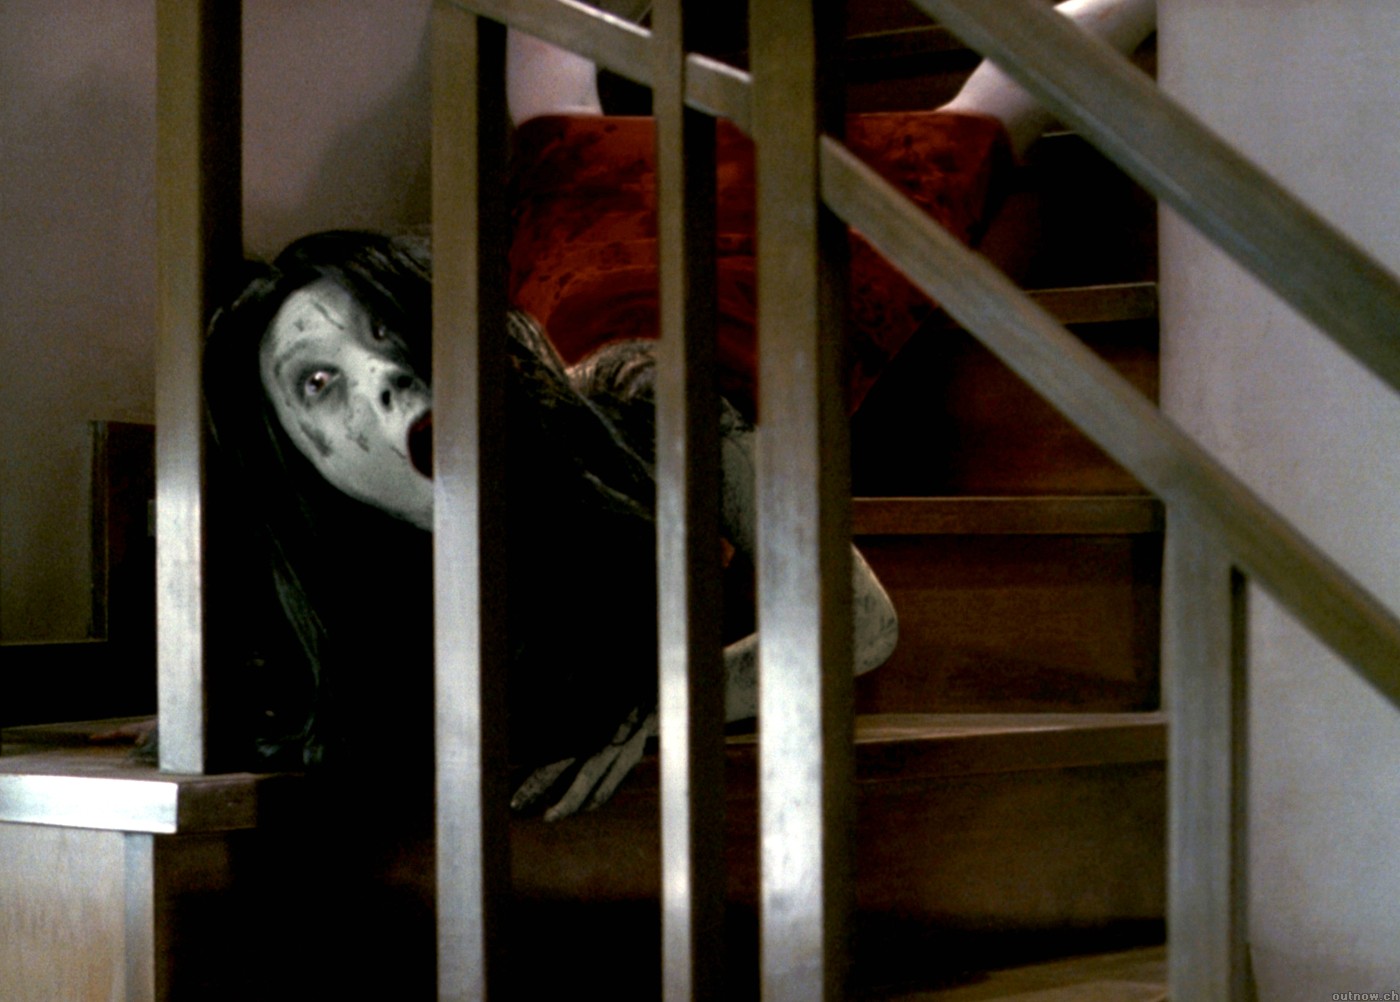 Movie The Grudge (2004) HD Wallpaper | Background Image